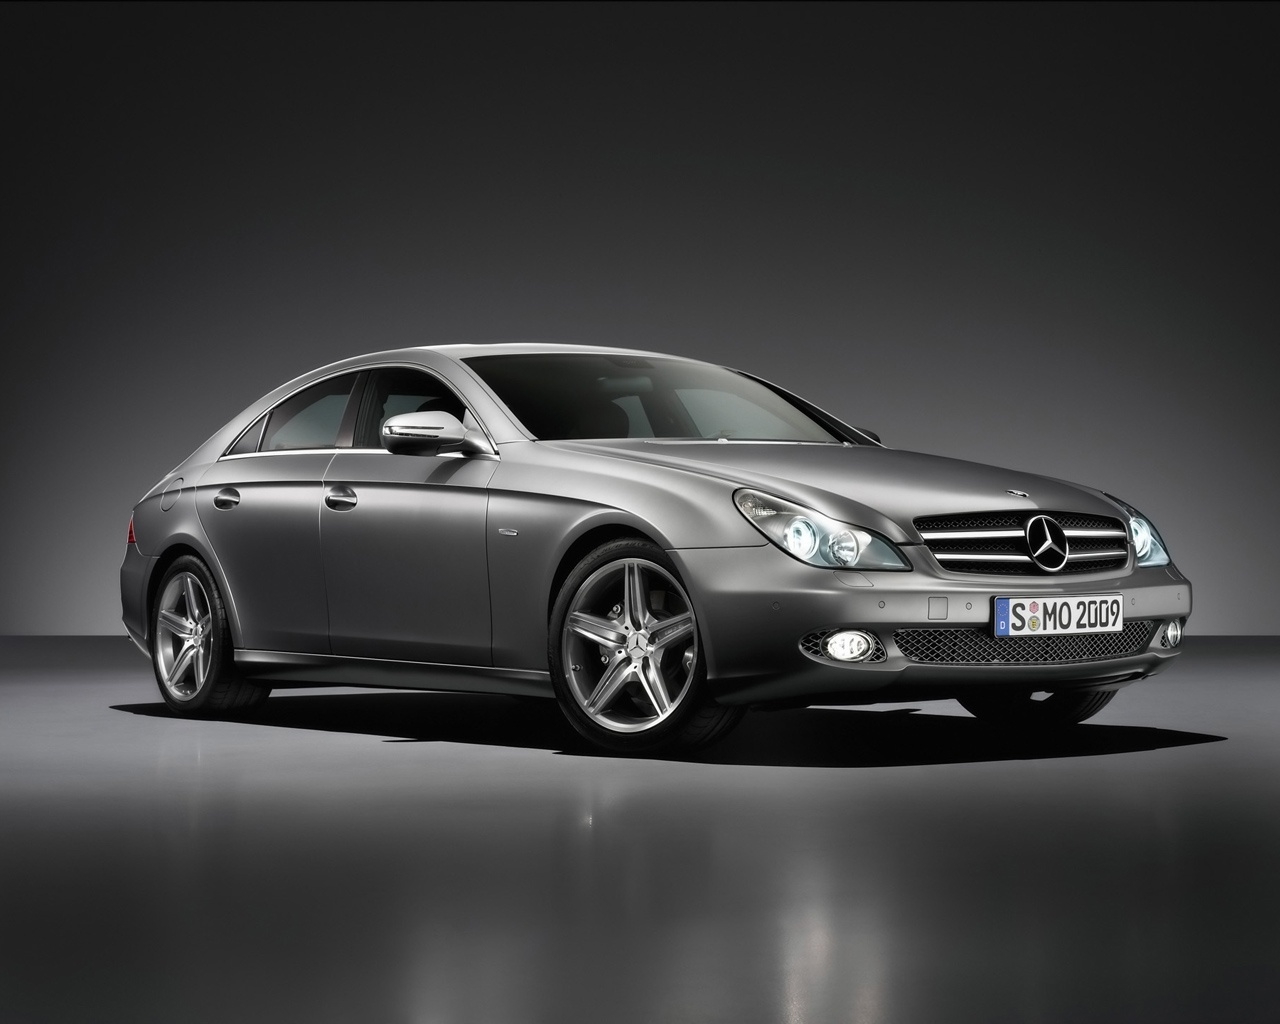 Mercedes Benz CLS 2009 for 1280 x 1024 resolution